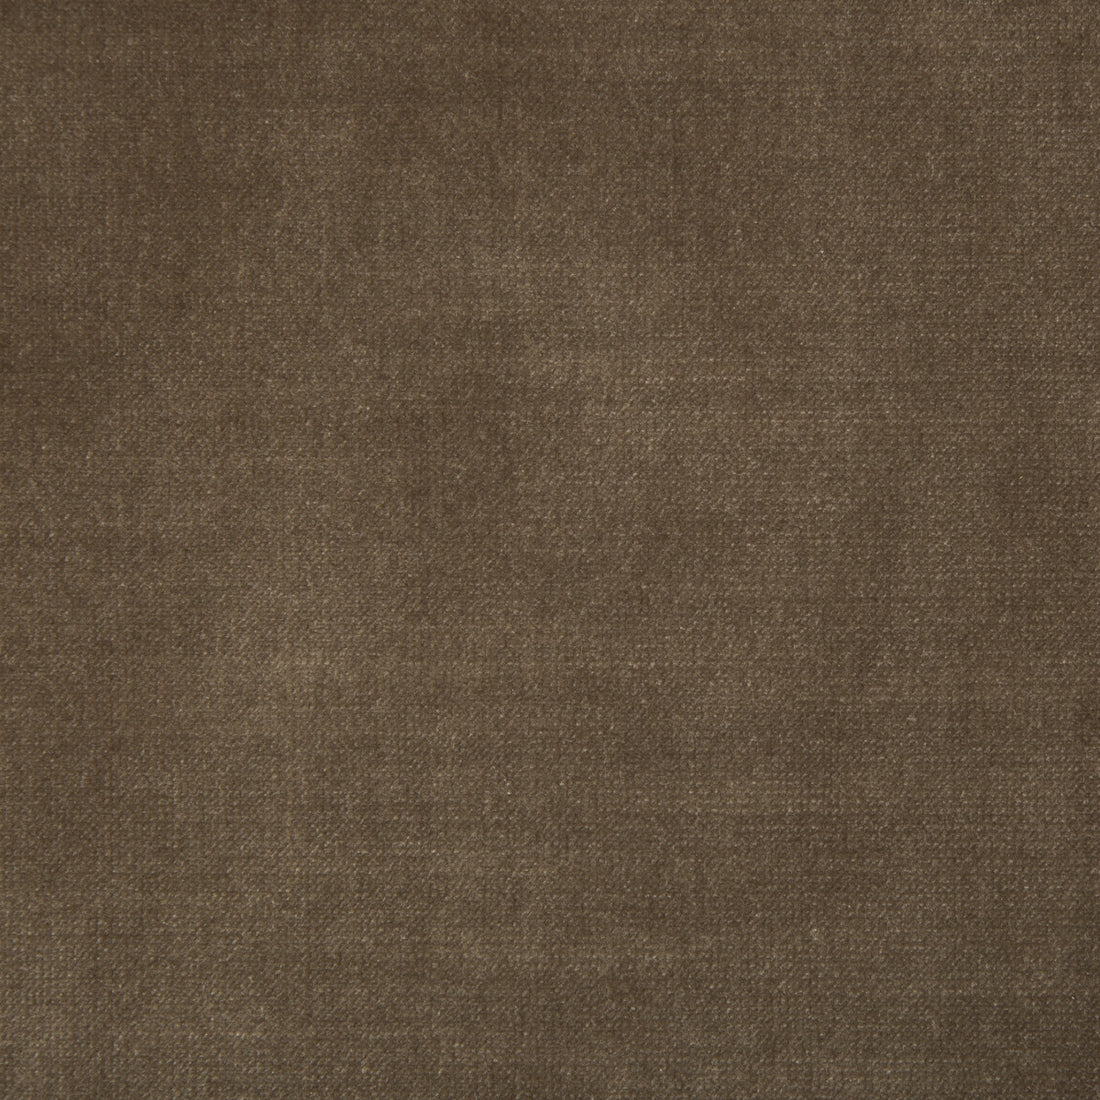 Chessford fabric in latte color - pattern 35360.66.0 - by Kravet Smart in the Performance collection